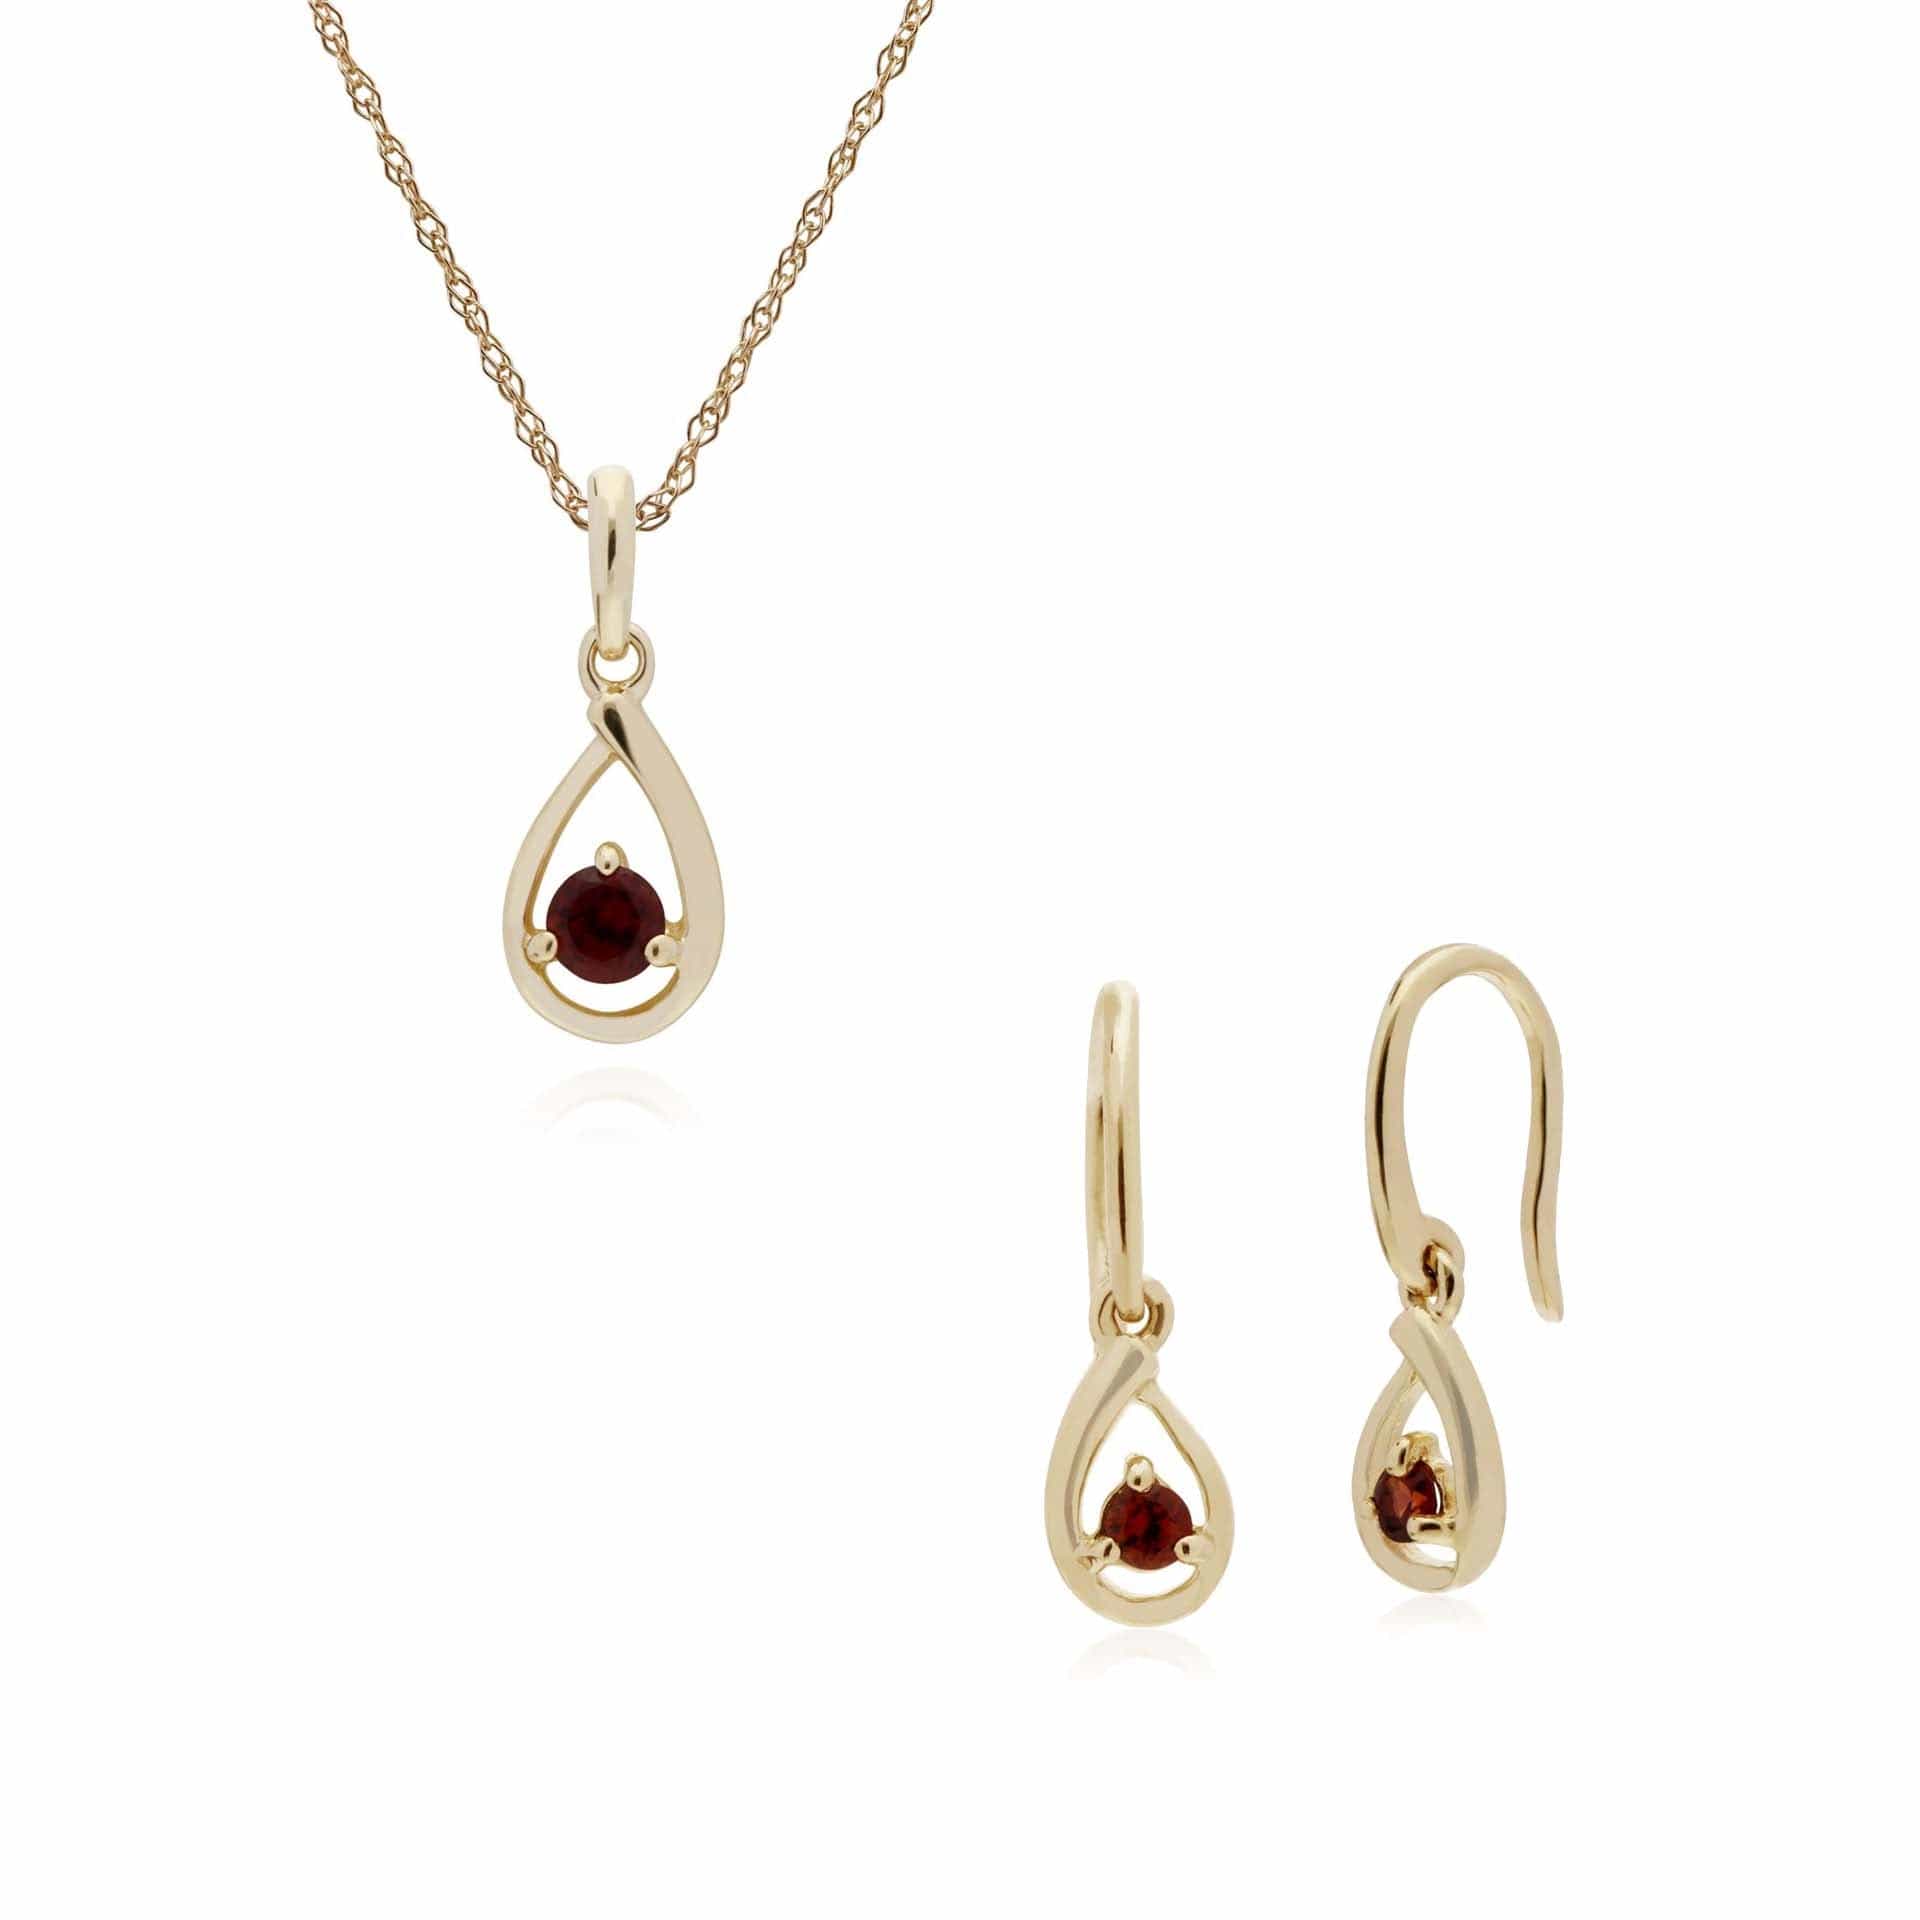 135E1190049-135P1551049 Classic Round Garnet Single Stone Tear Drop Earrings & Necklace Set in 9ct Yellow Gold 1